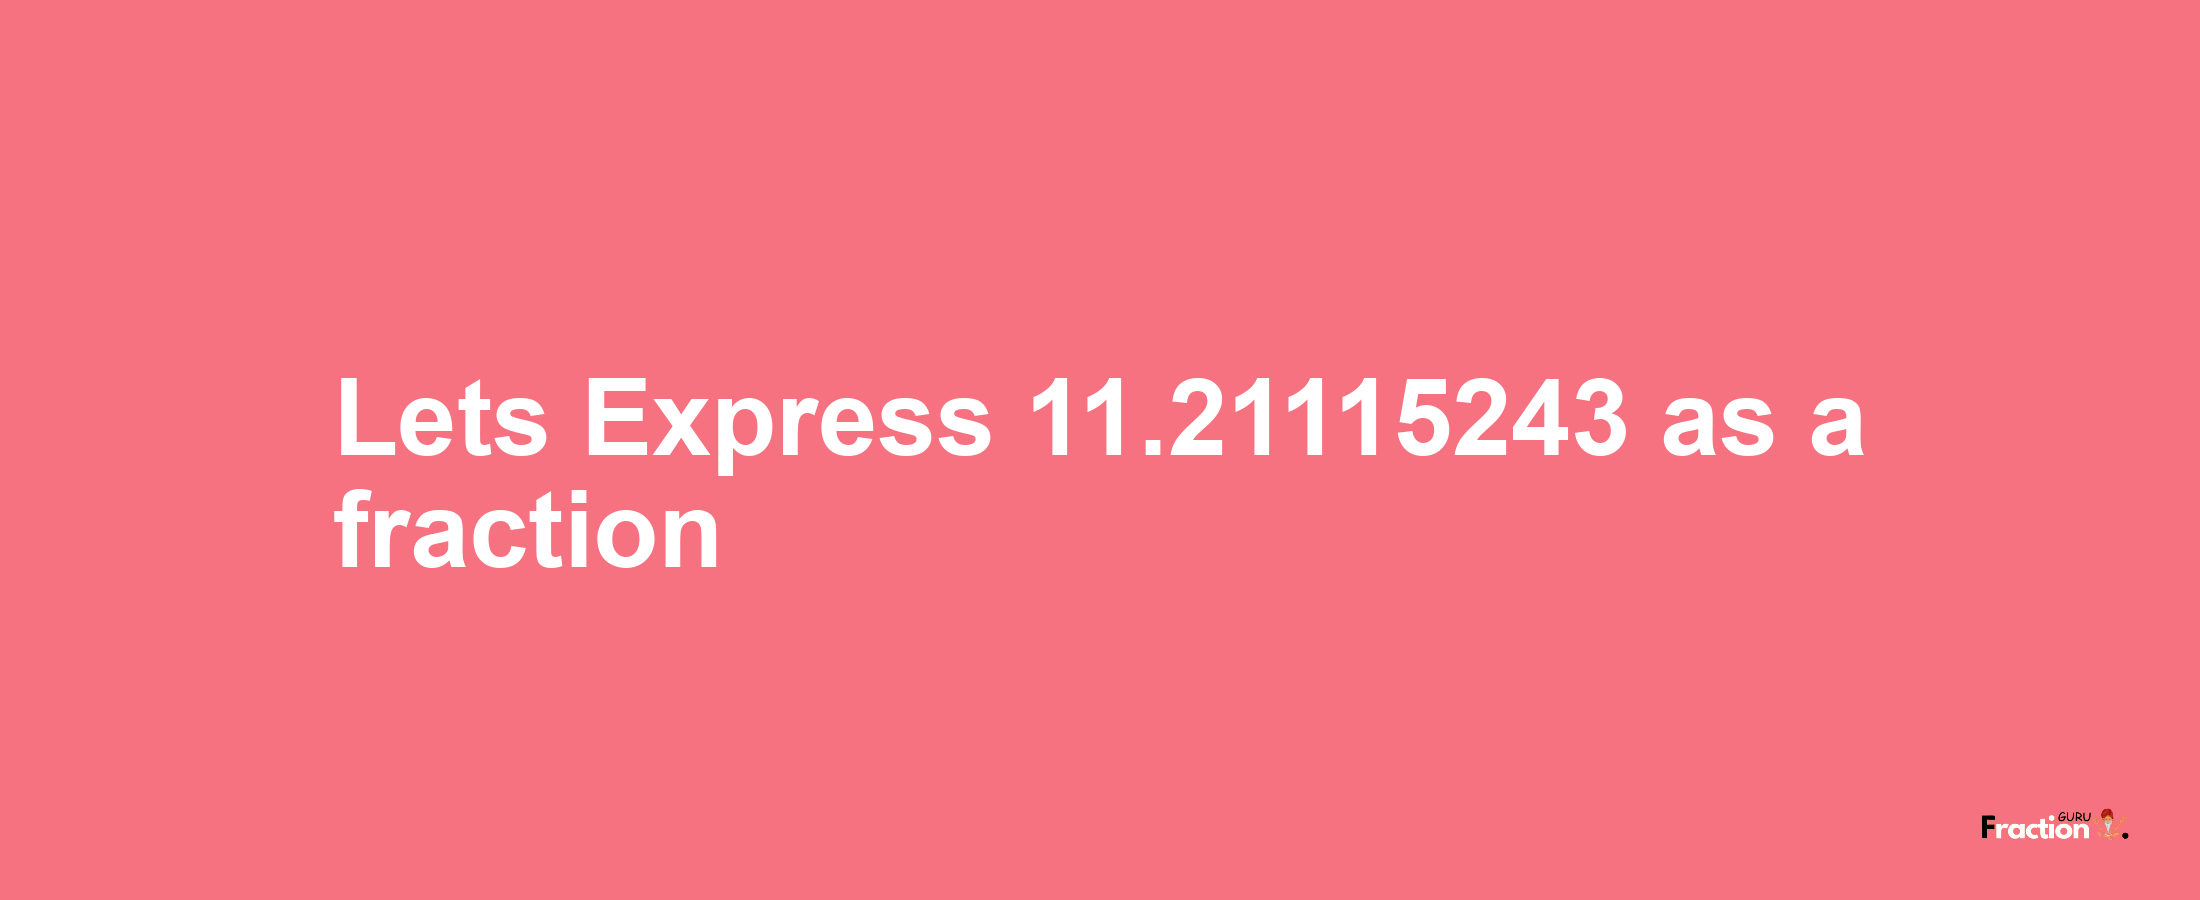 Lets Express 11.21115243 as afraction